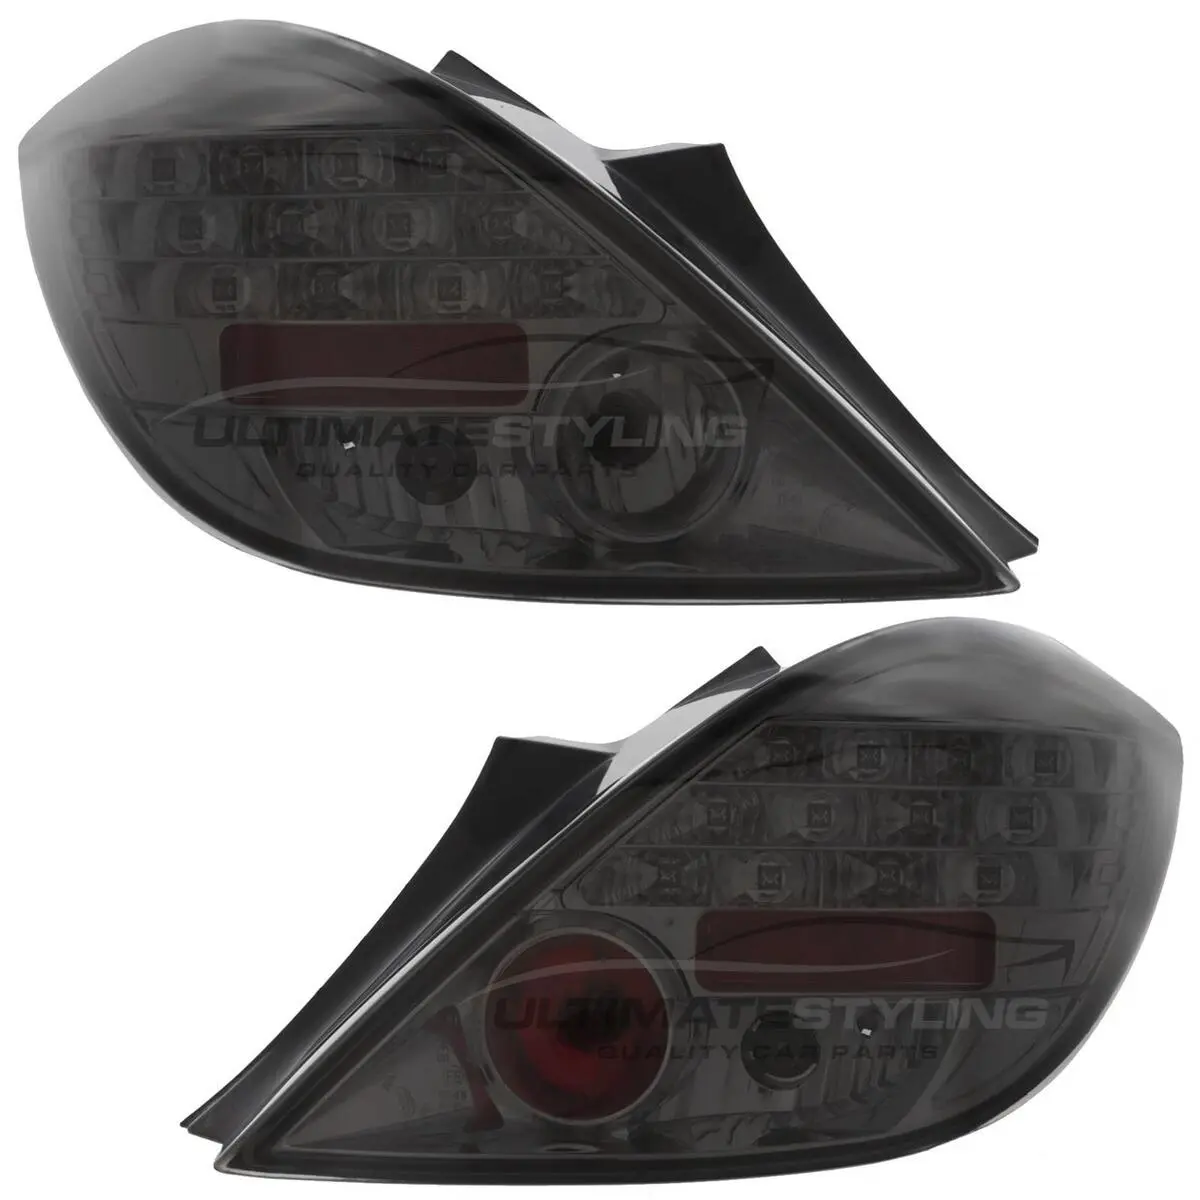 vauxhall corsa d smoked rear lights - What is the ABS light on a Vauxhall Corsa